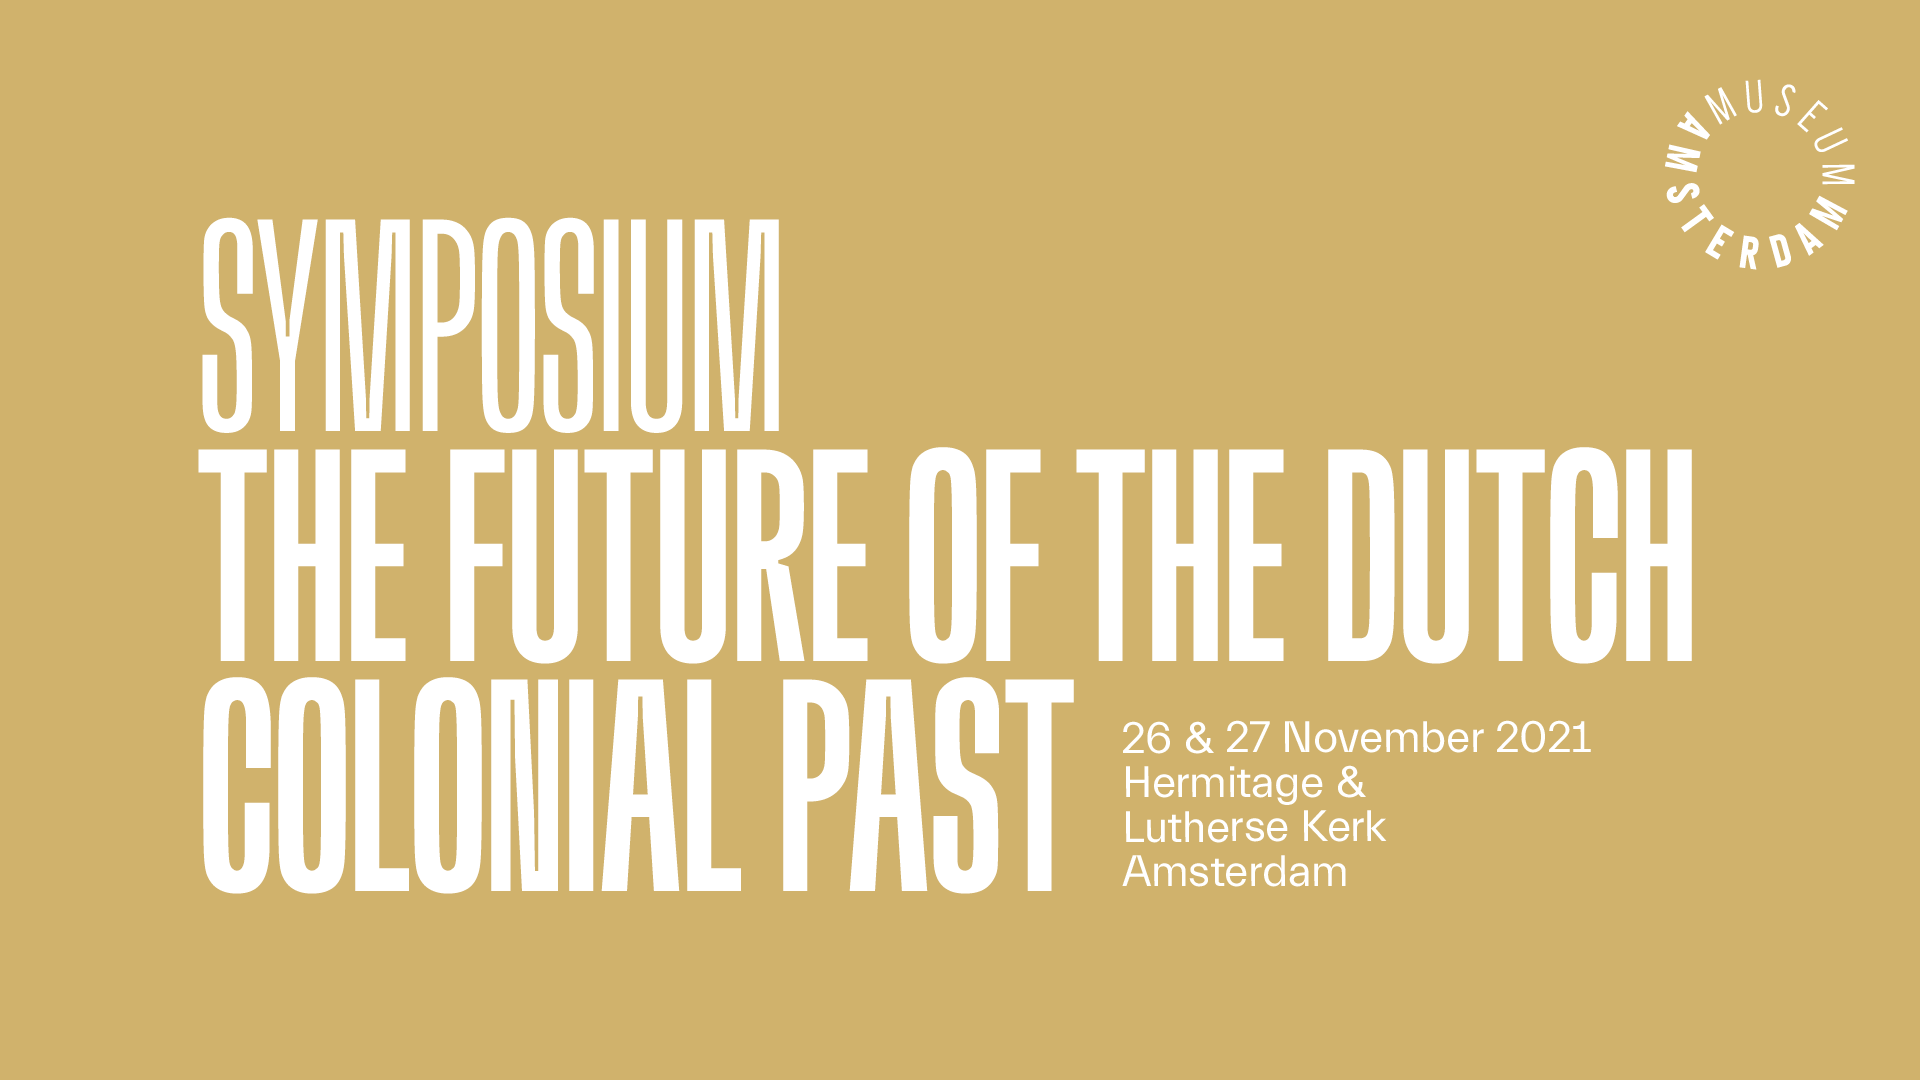 “The Future of the Dutch Colonial Past”